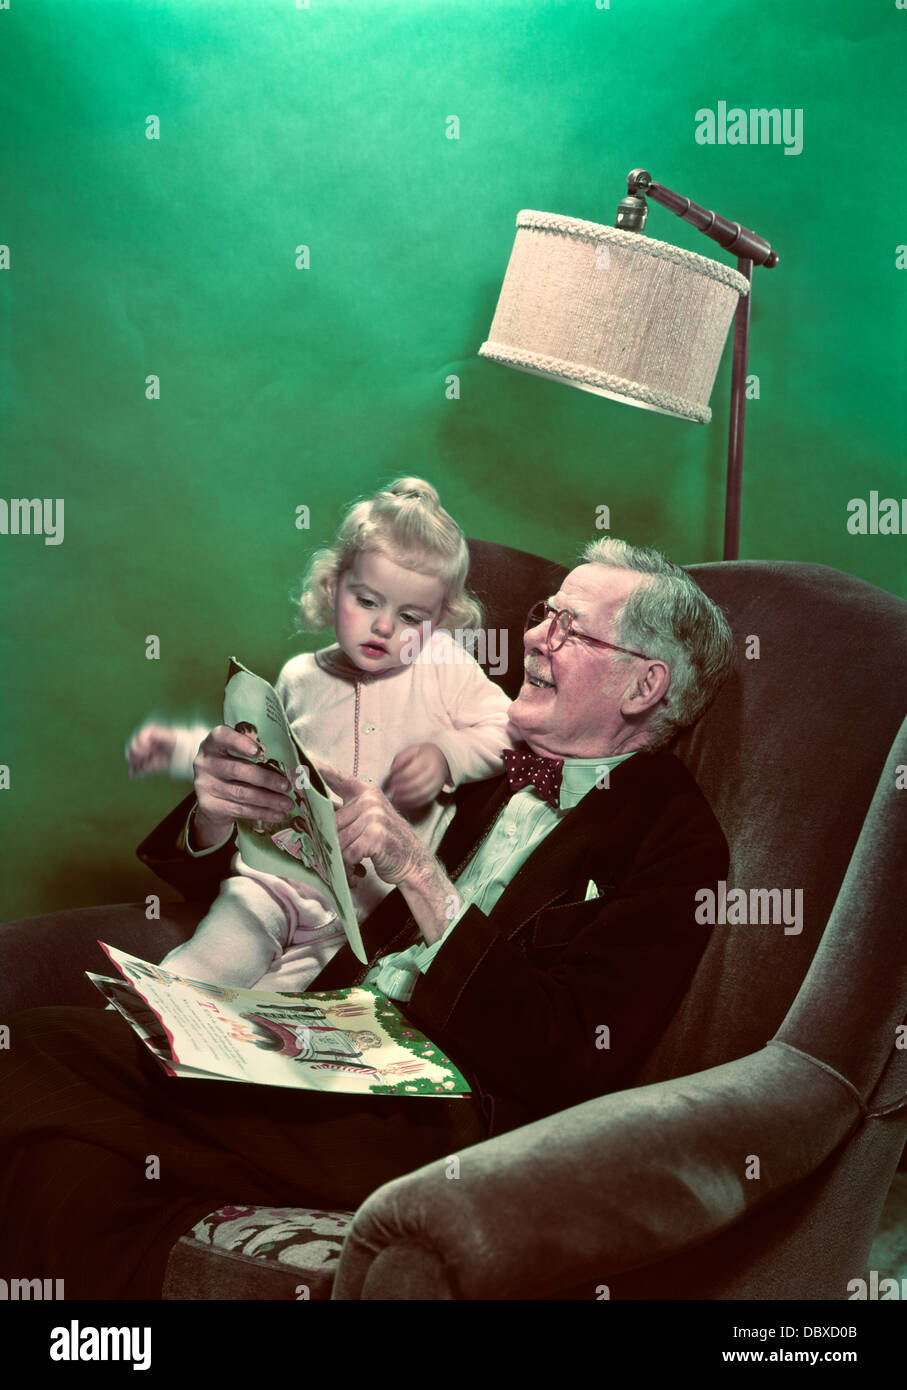 1940s 1950s GRANDDAUGHTER SITTING ON SMILING GRANDFATHER’S LAP READING PICTURE BOOKS Stock Photo